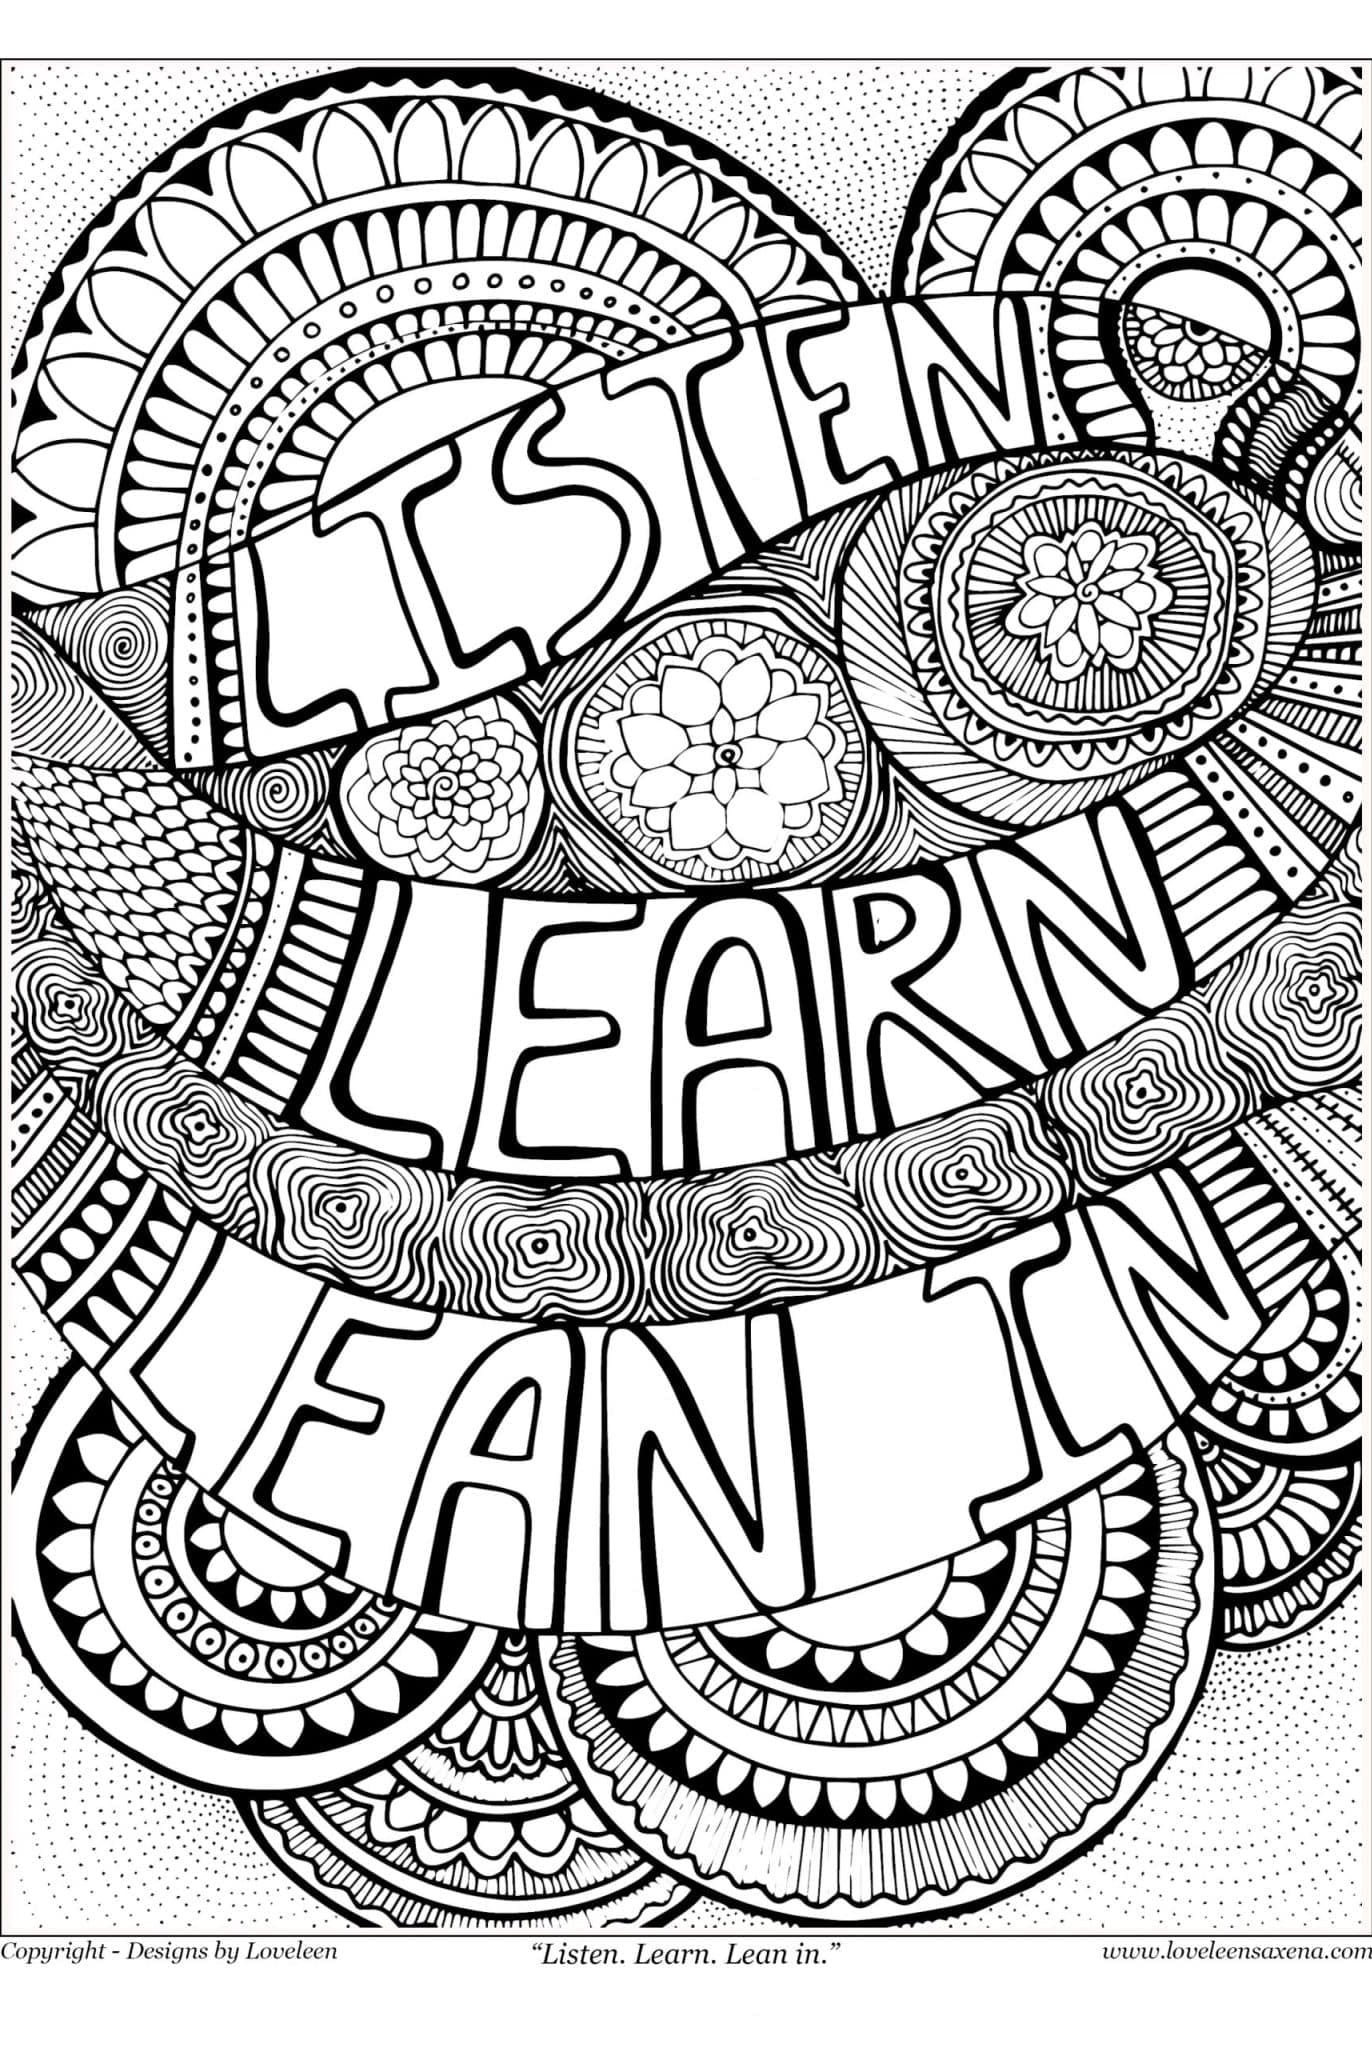 Listen Learn Lean In coloring page